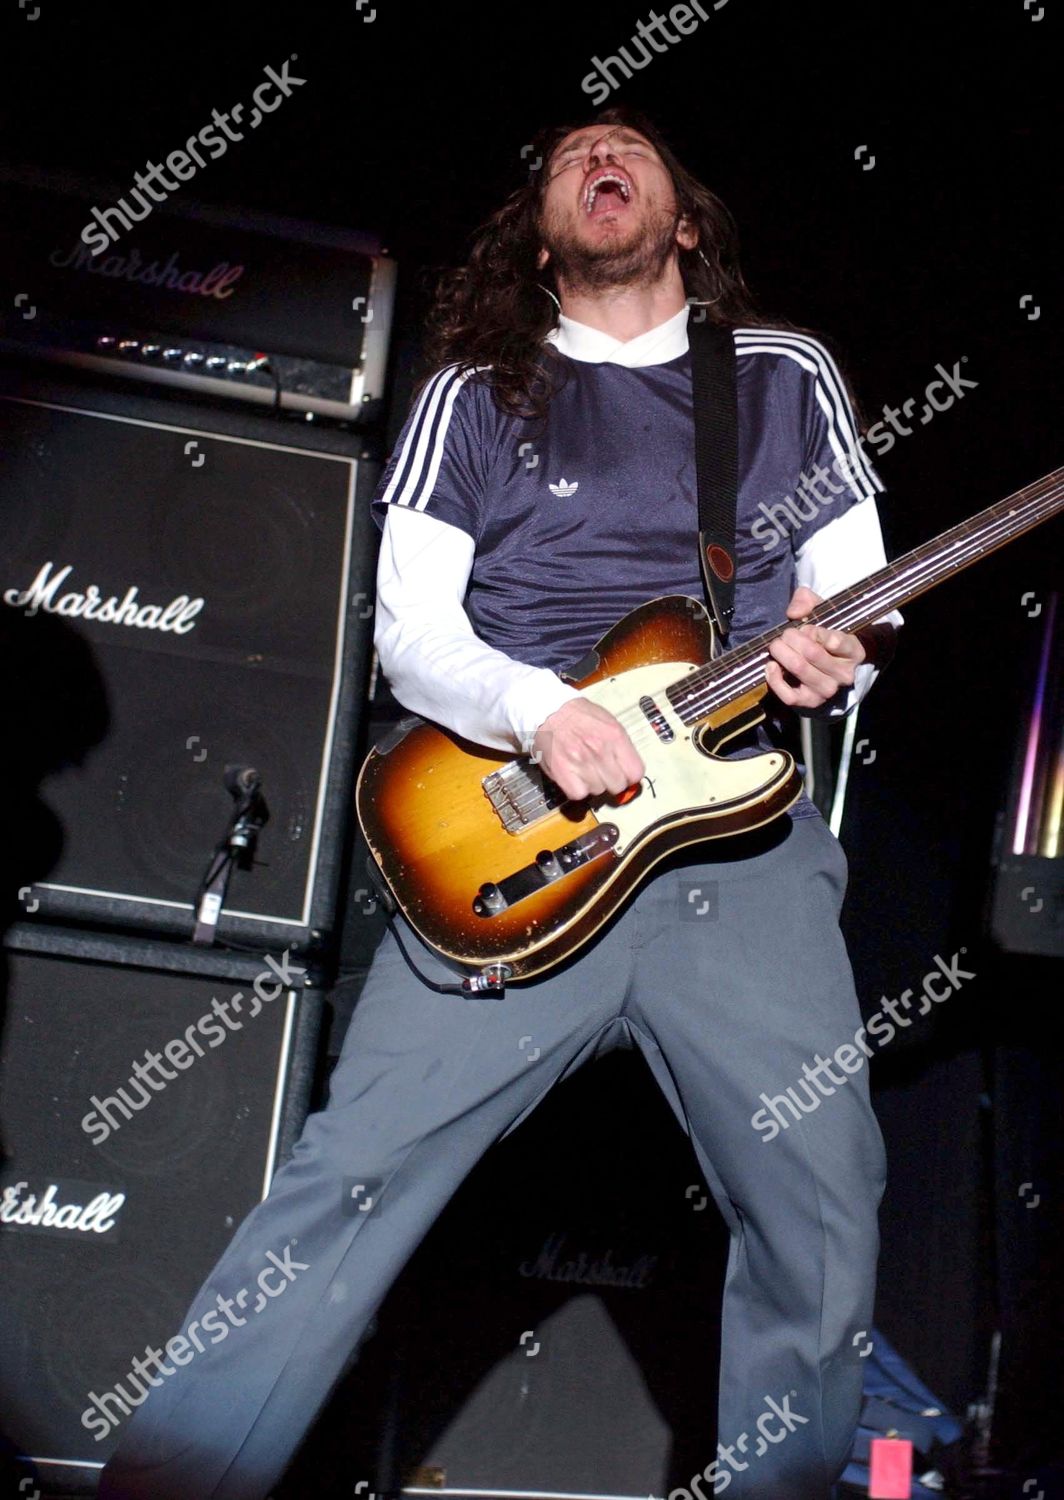 zuurstof Wreedheid reactie Red Hot Chili Peppers John Frusciante Editorial Stock Photo - Stock Image |  Shutterstock